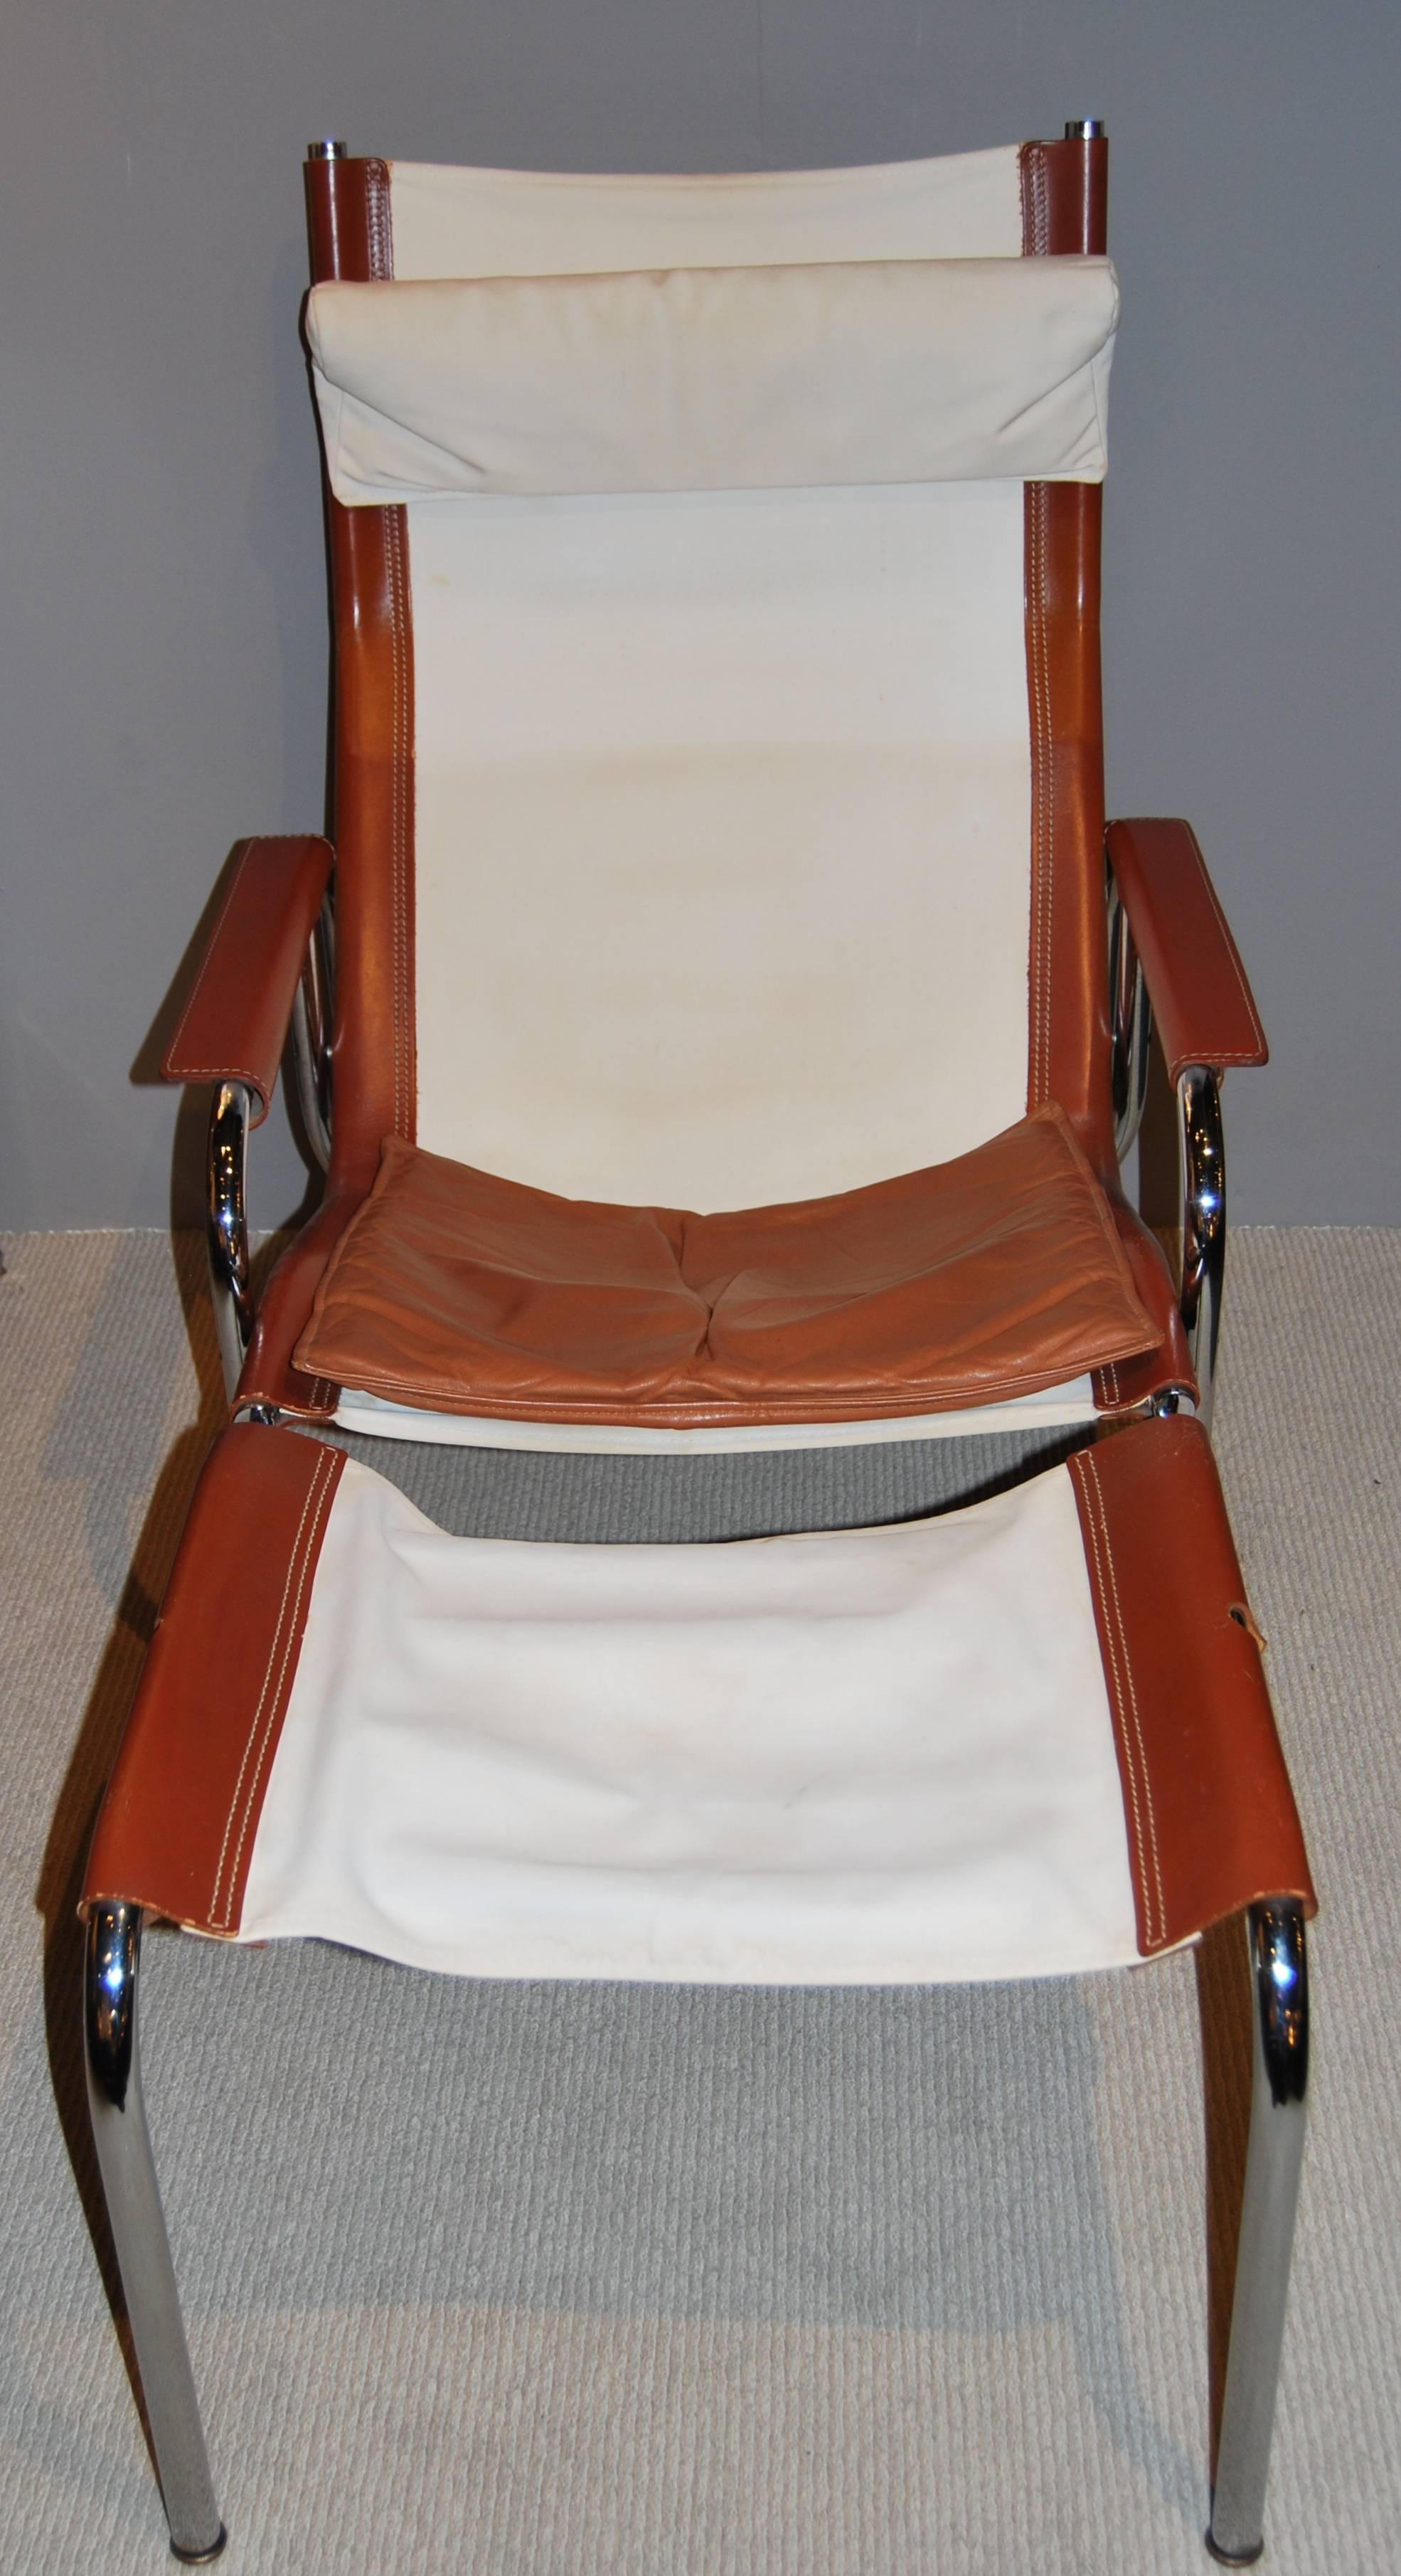 Hans Eichenberger Lounge Chair and Ottoman, Switzerland, 1960s For Sale 1